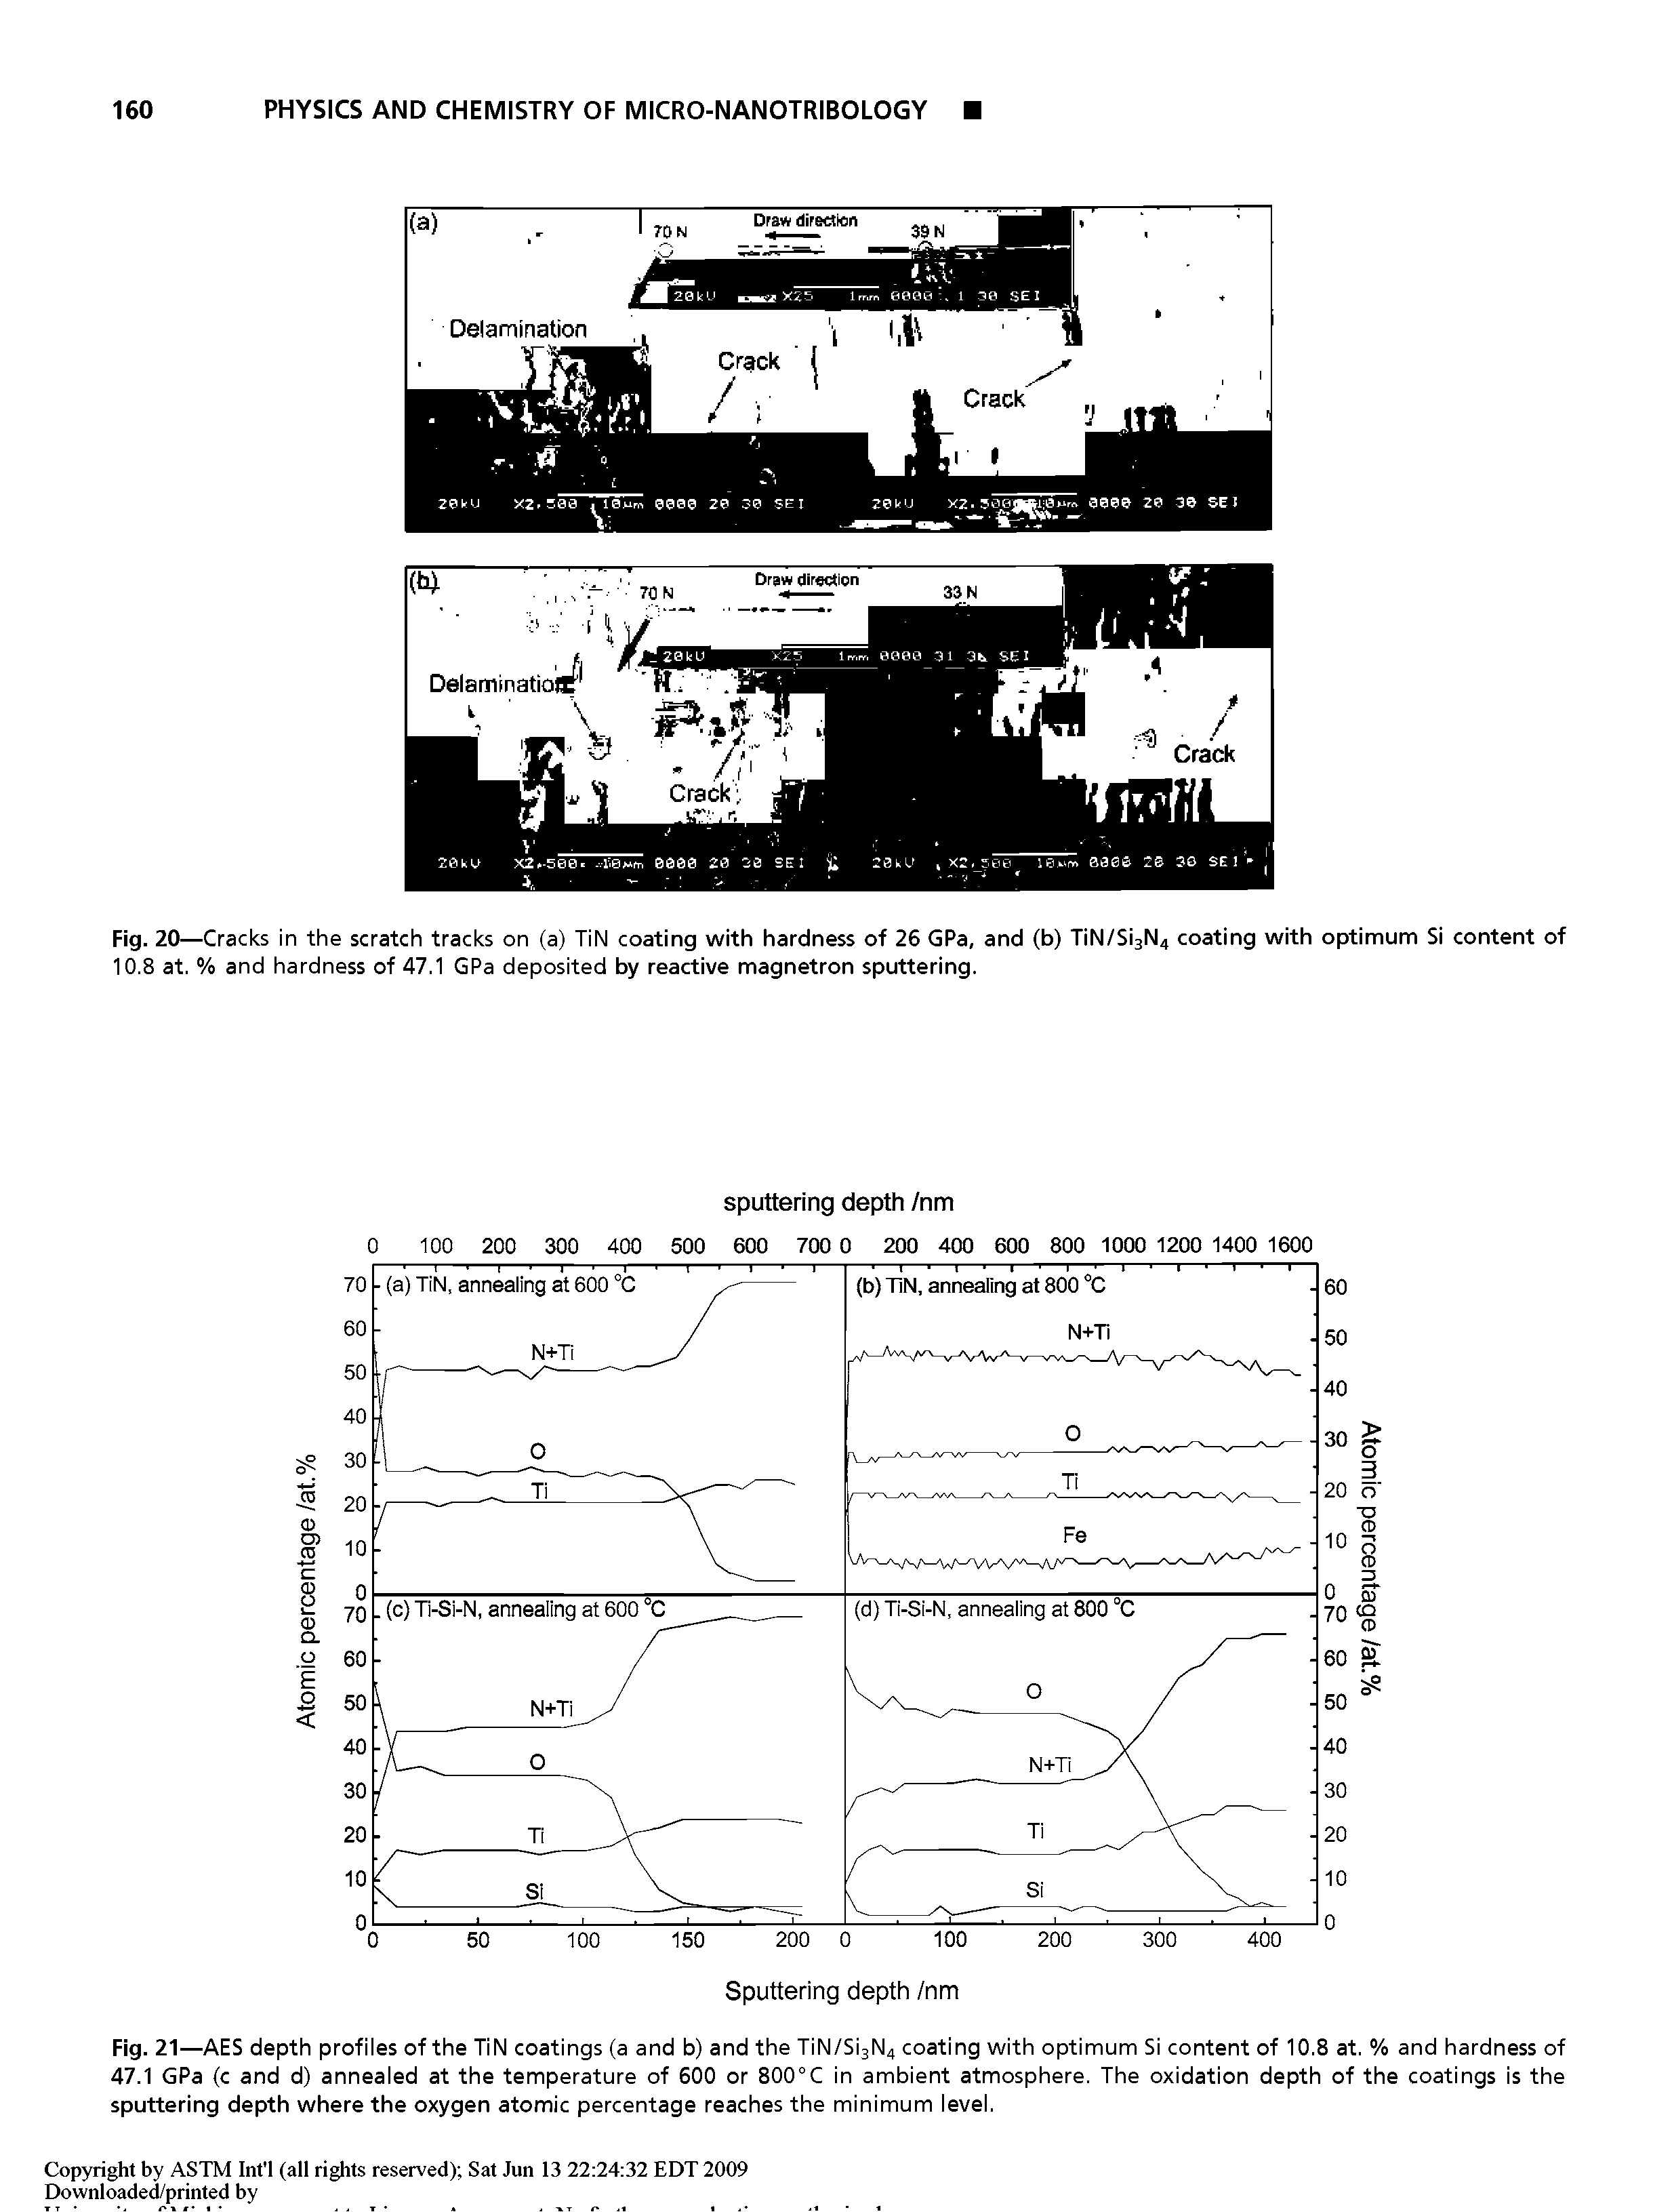 Fig. 21—AES depth profiles of the TiN coatings (a and b) and the TiN/Si3N4 coating with optimum Si content of 10.8 at. % and hardness of 47.1 GPa (c and d) annealed at the temperature of 600 or 800°C in ambient atmosphere. The oxidation depth of the coatings is the sputtering depth where the oxygen atomic percentage reaches the minimum level.